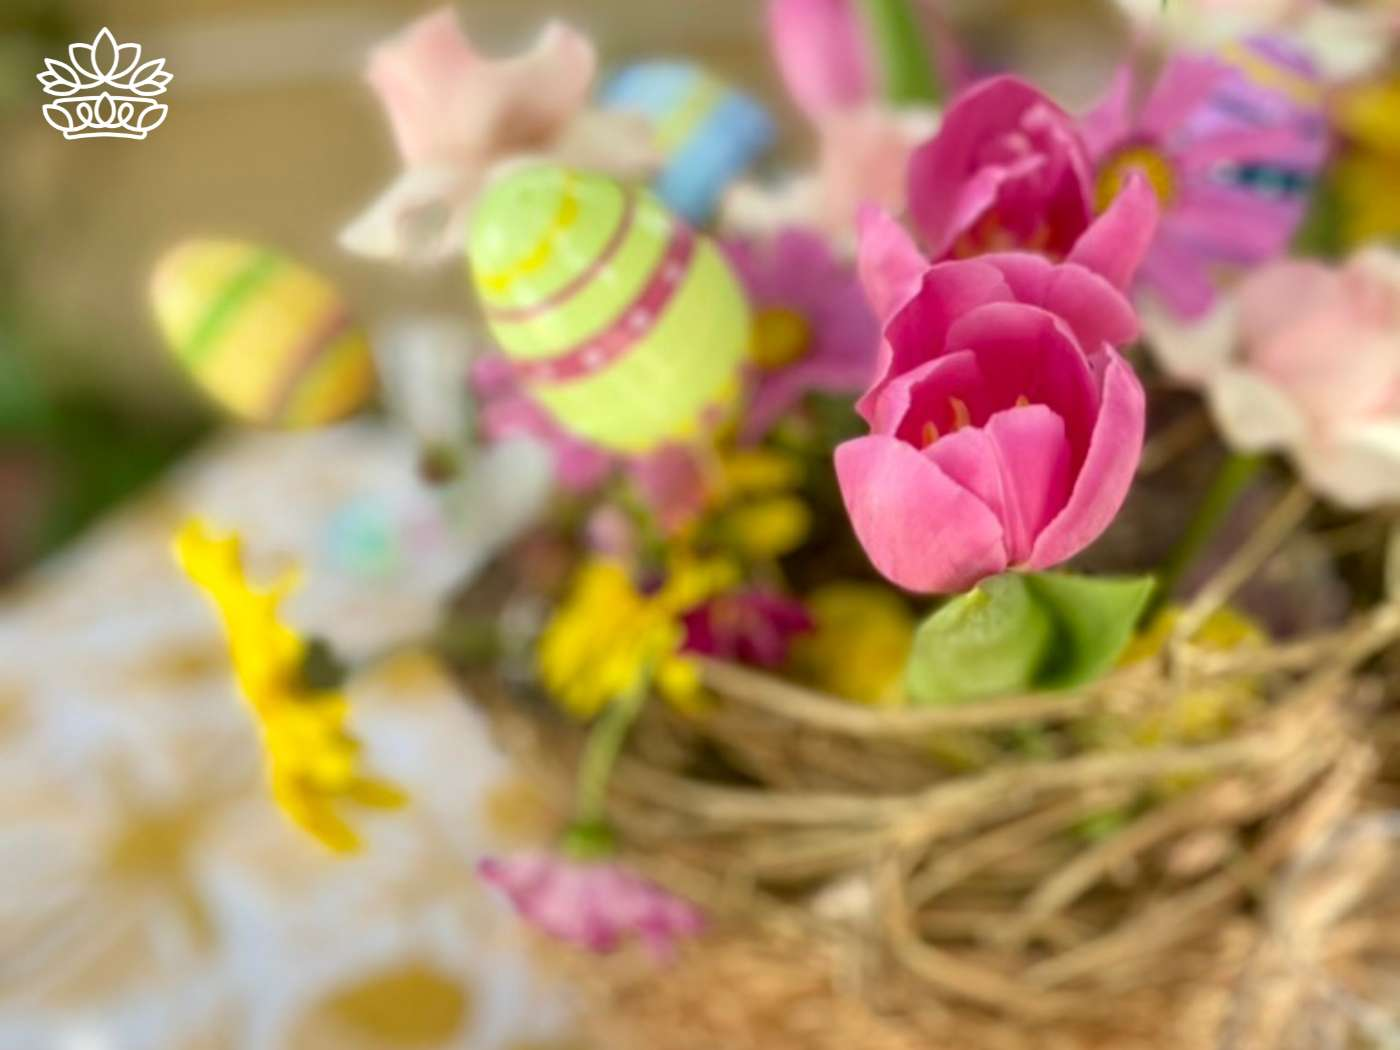 Blurred image of a vibrant Easter basket with pink tulips and festive decorations, including Easter bunny motifs, offering creative Easter basket ideas from the Easter Collection by Fabulous Flowers and Gifts.